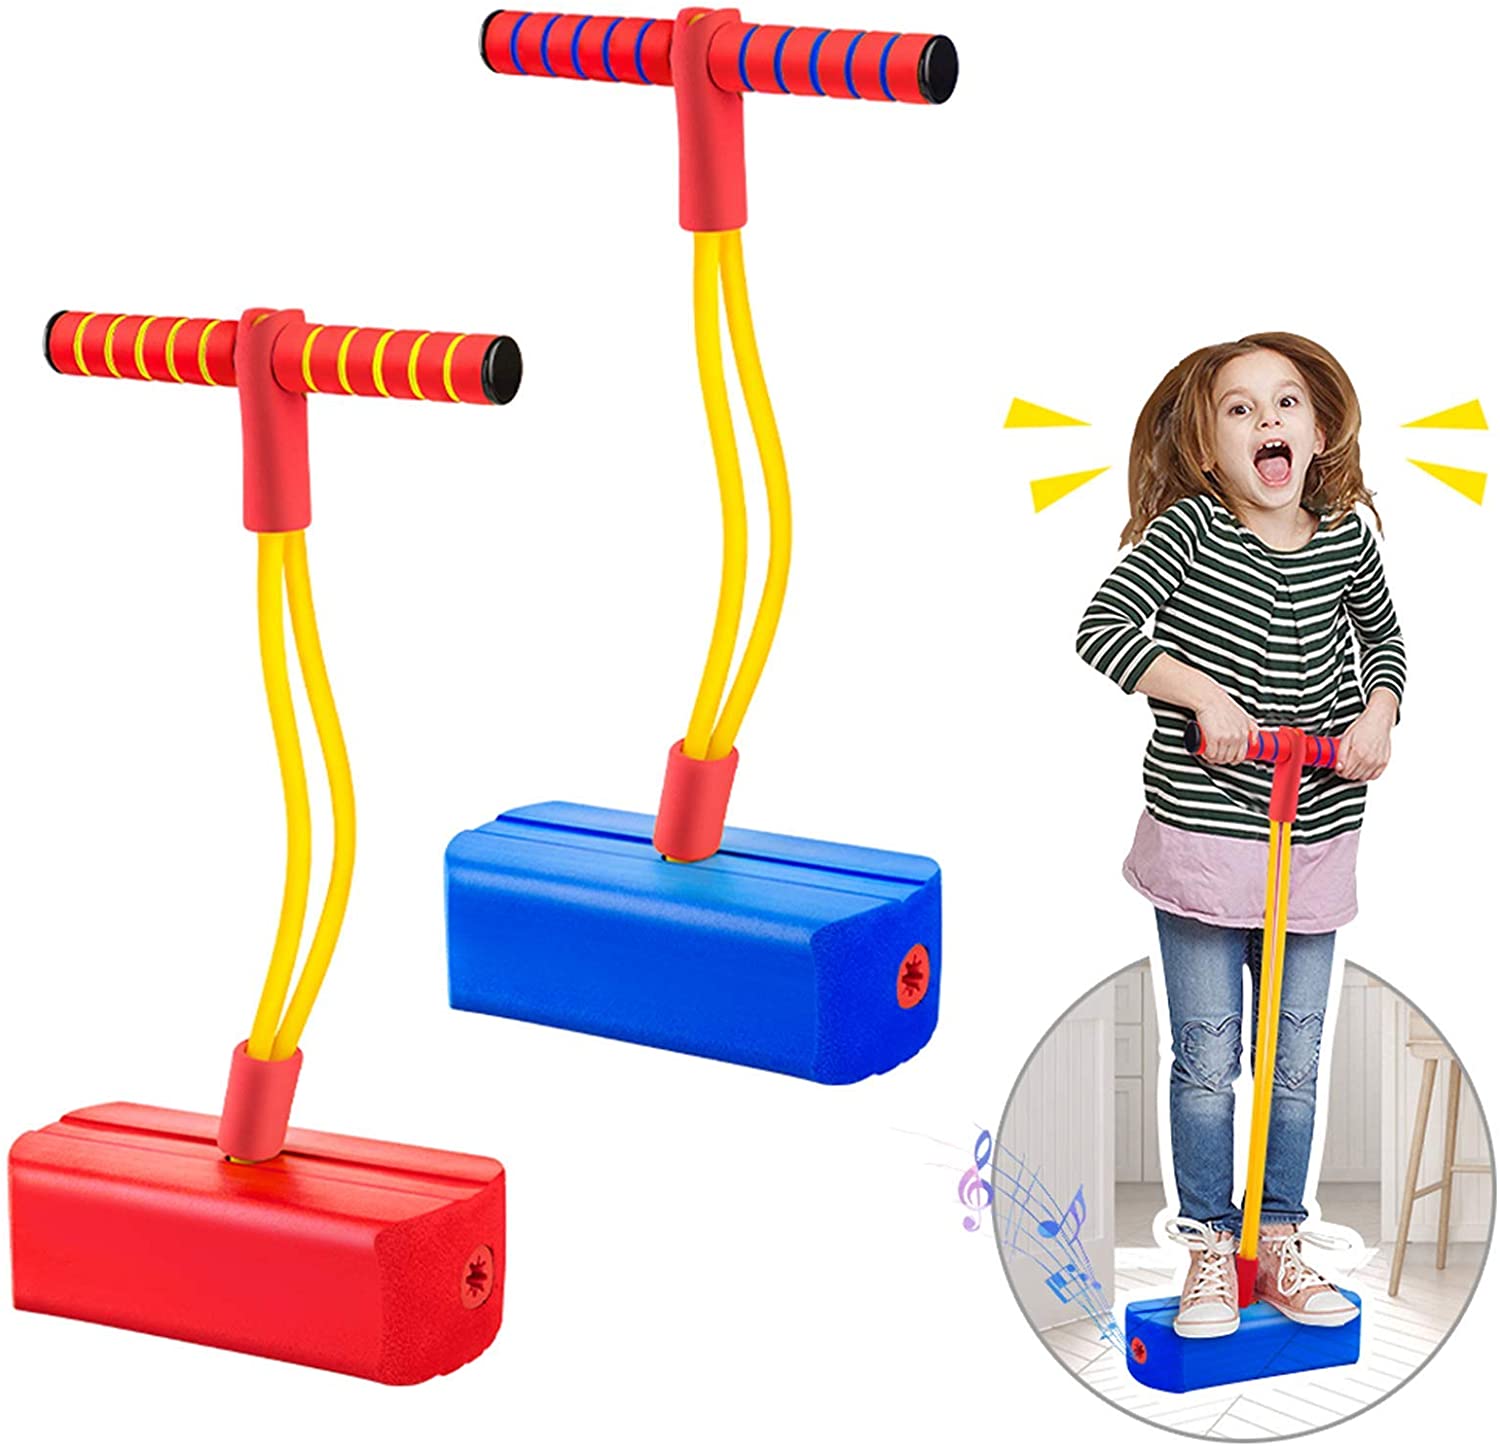 Foam Pogo Jumper for Kids.Durable Foam and Bungee Jumper for Ages 3 and up.Play at Indoors and Outdoors.Supports up to 250lbs.Best Gifts for Birthday Christmas and Party